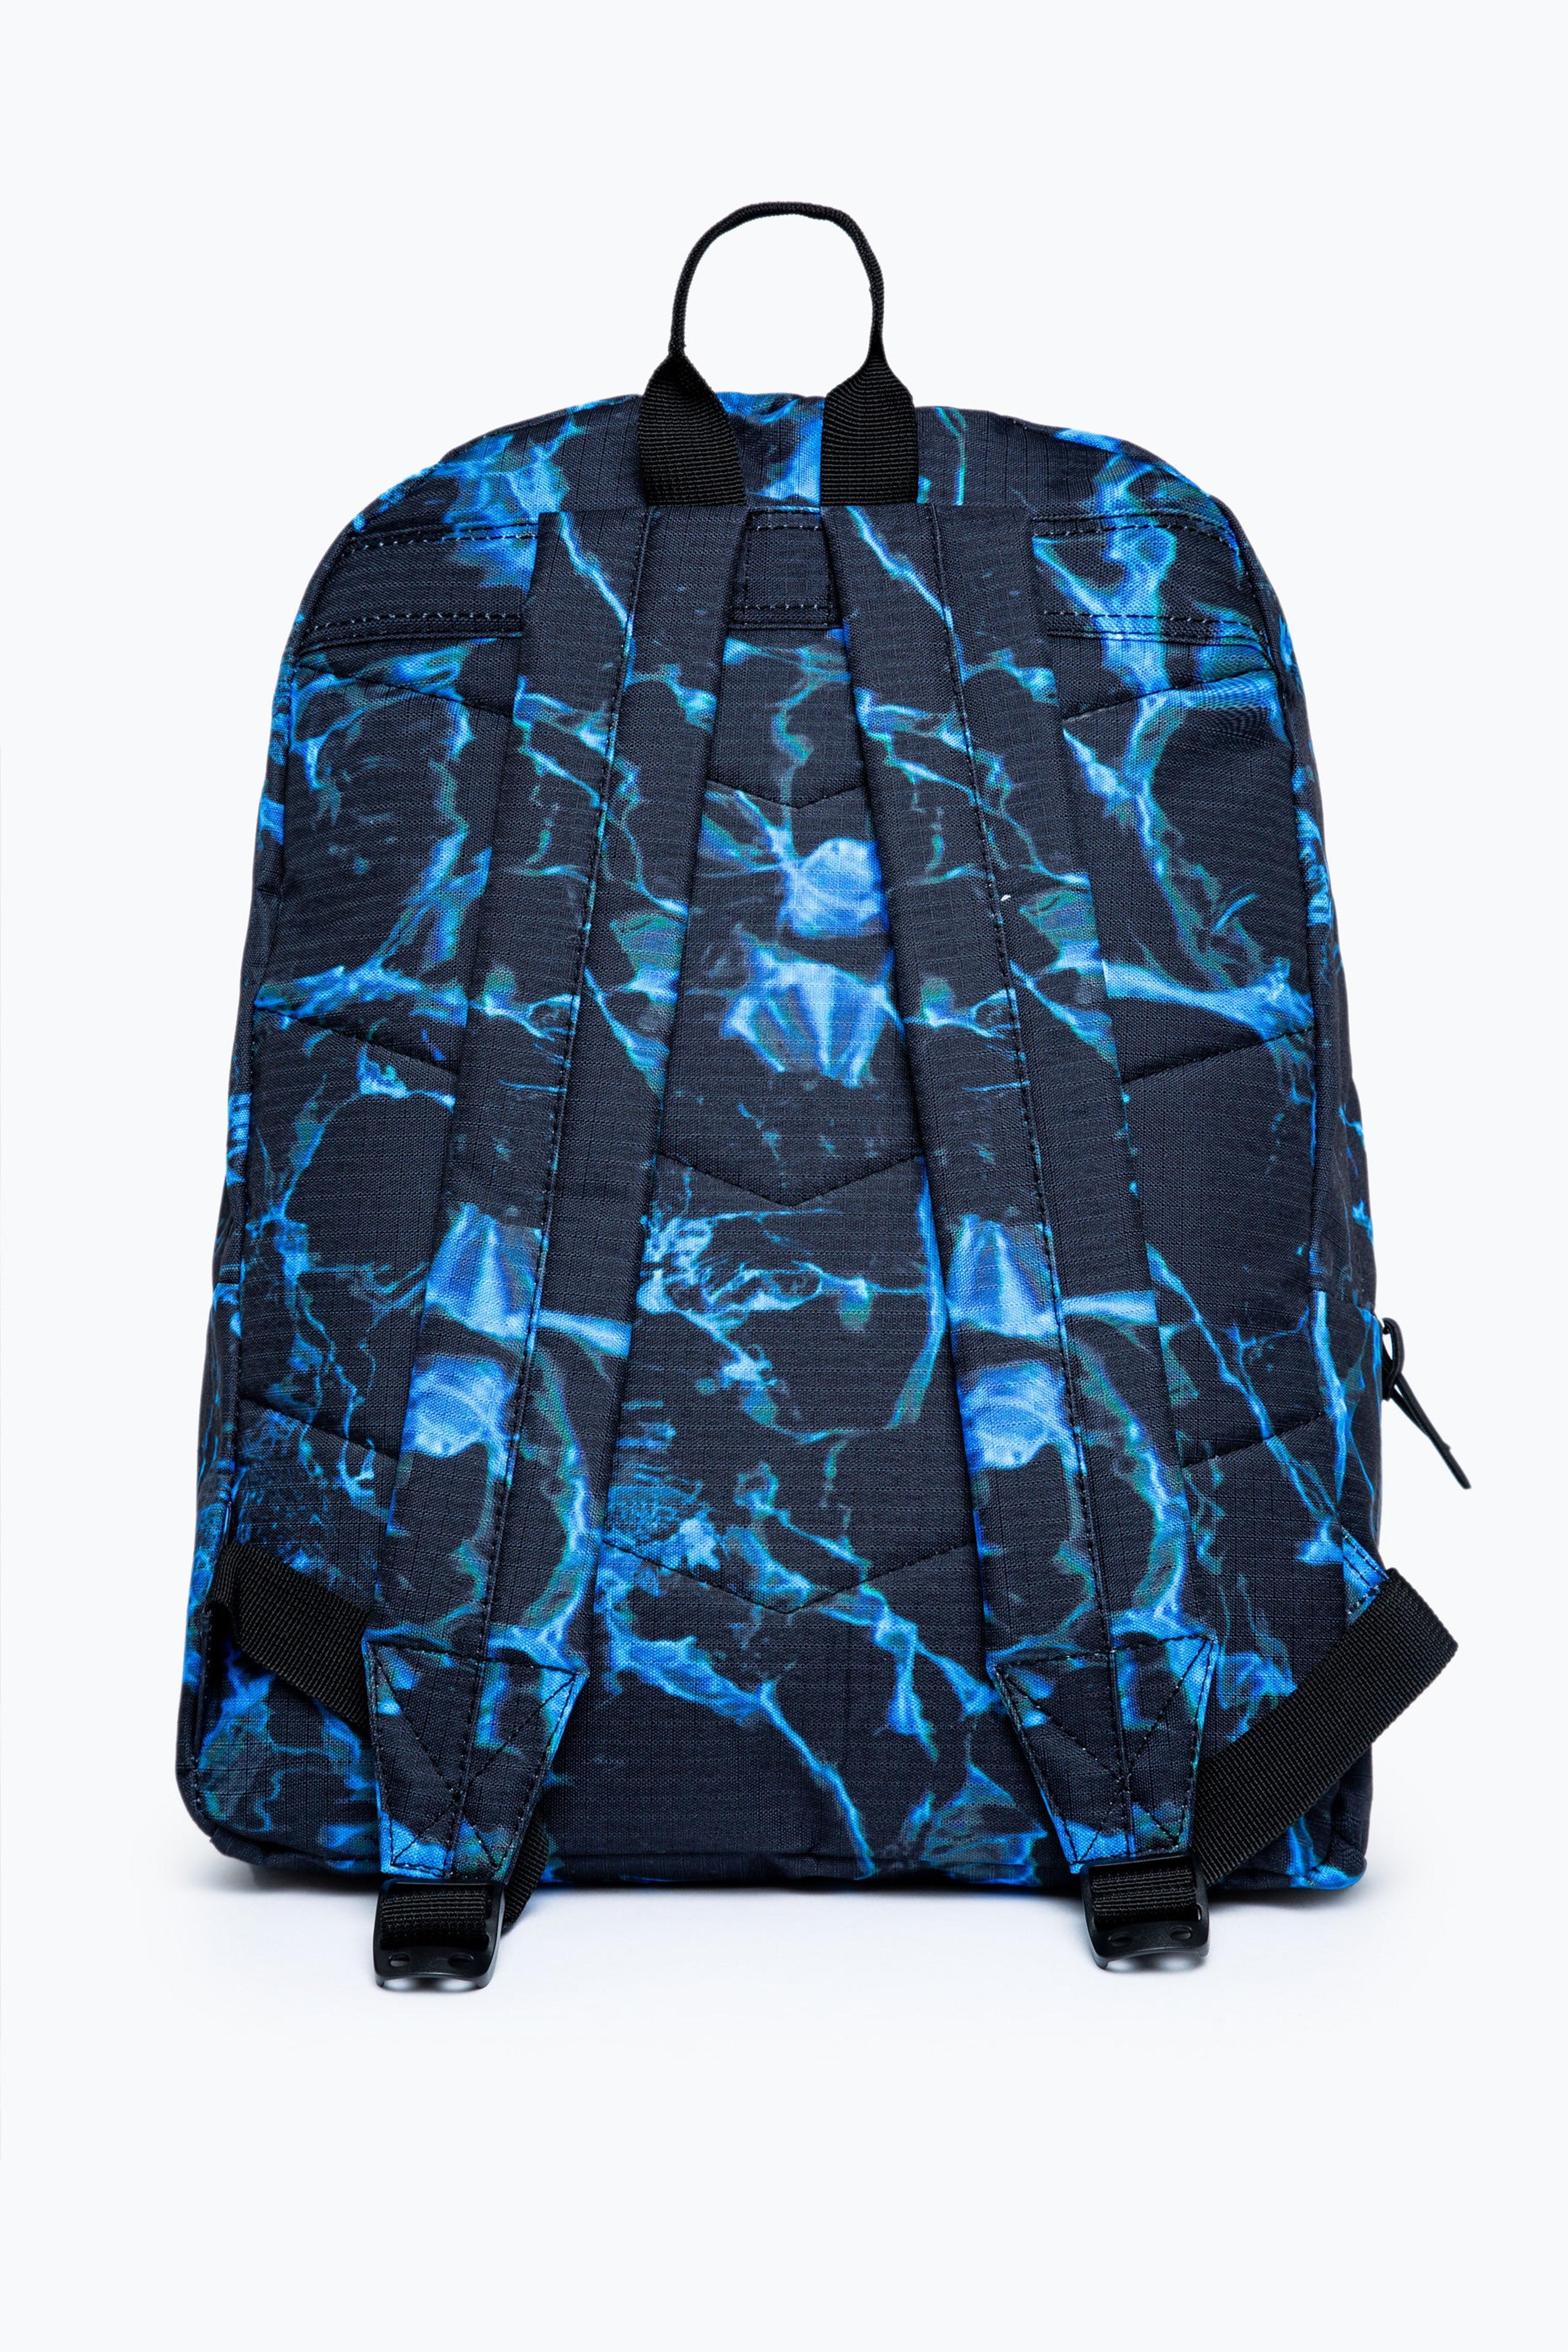 Alternate View 2 of HYPE X-RAY POOL BACKPACK